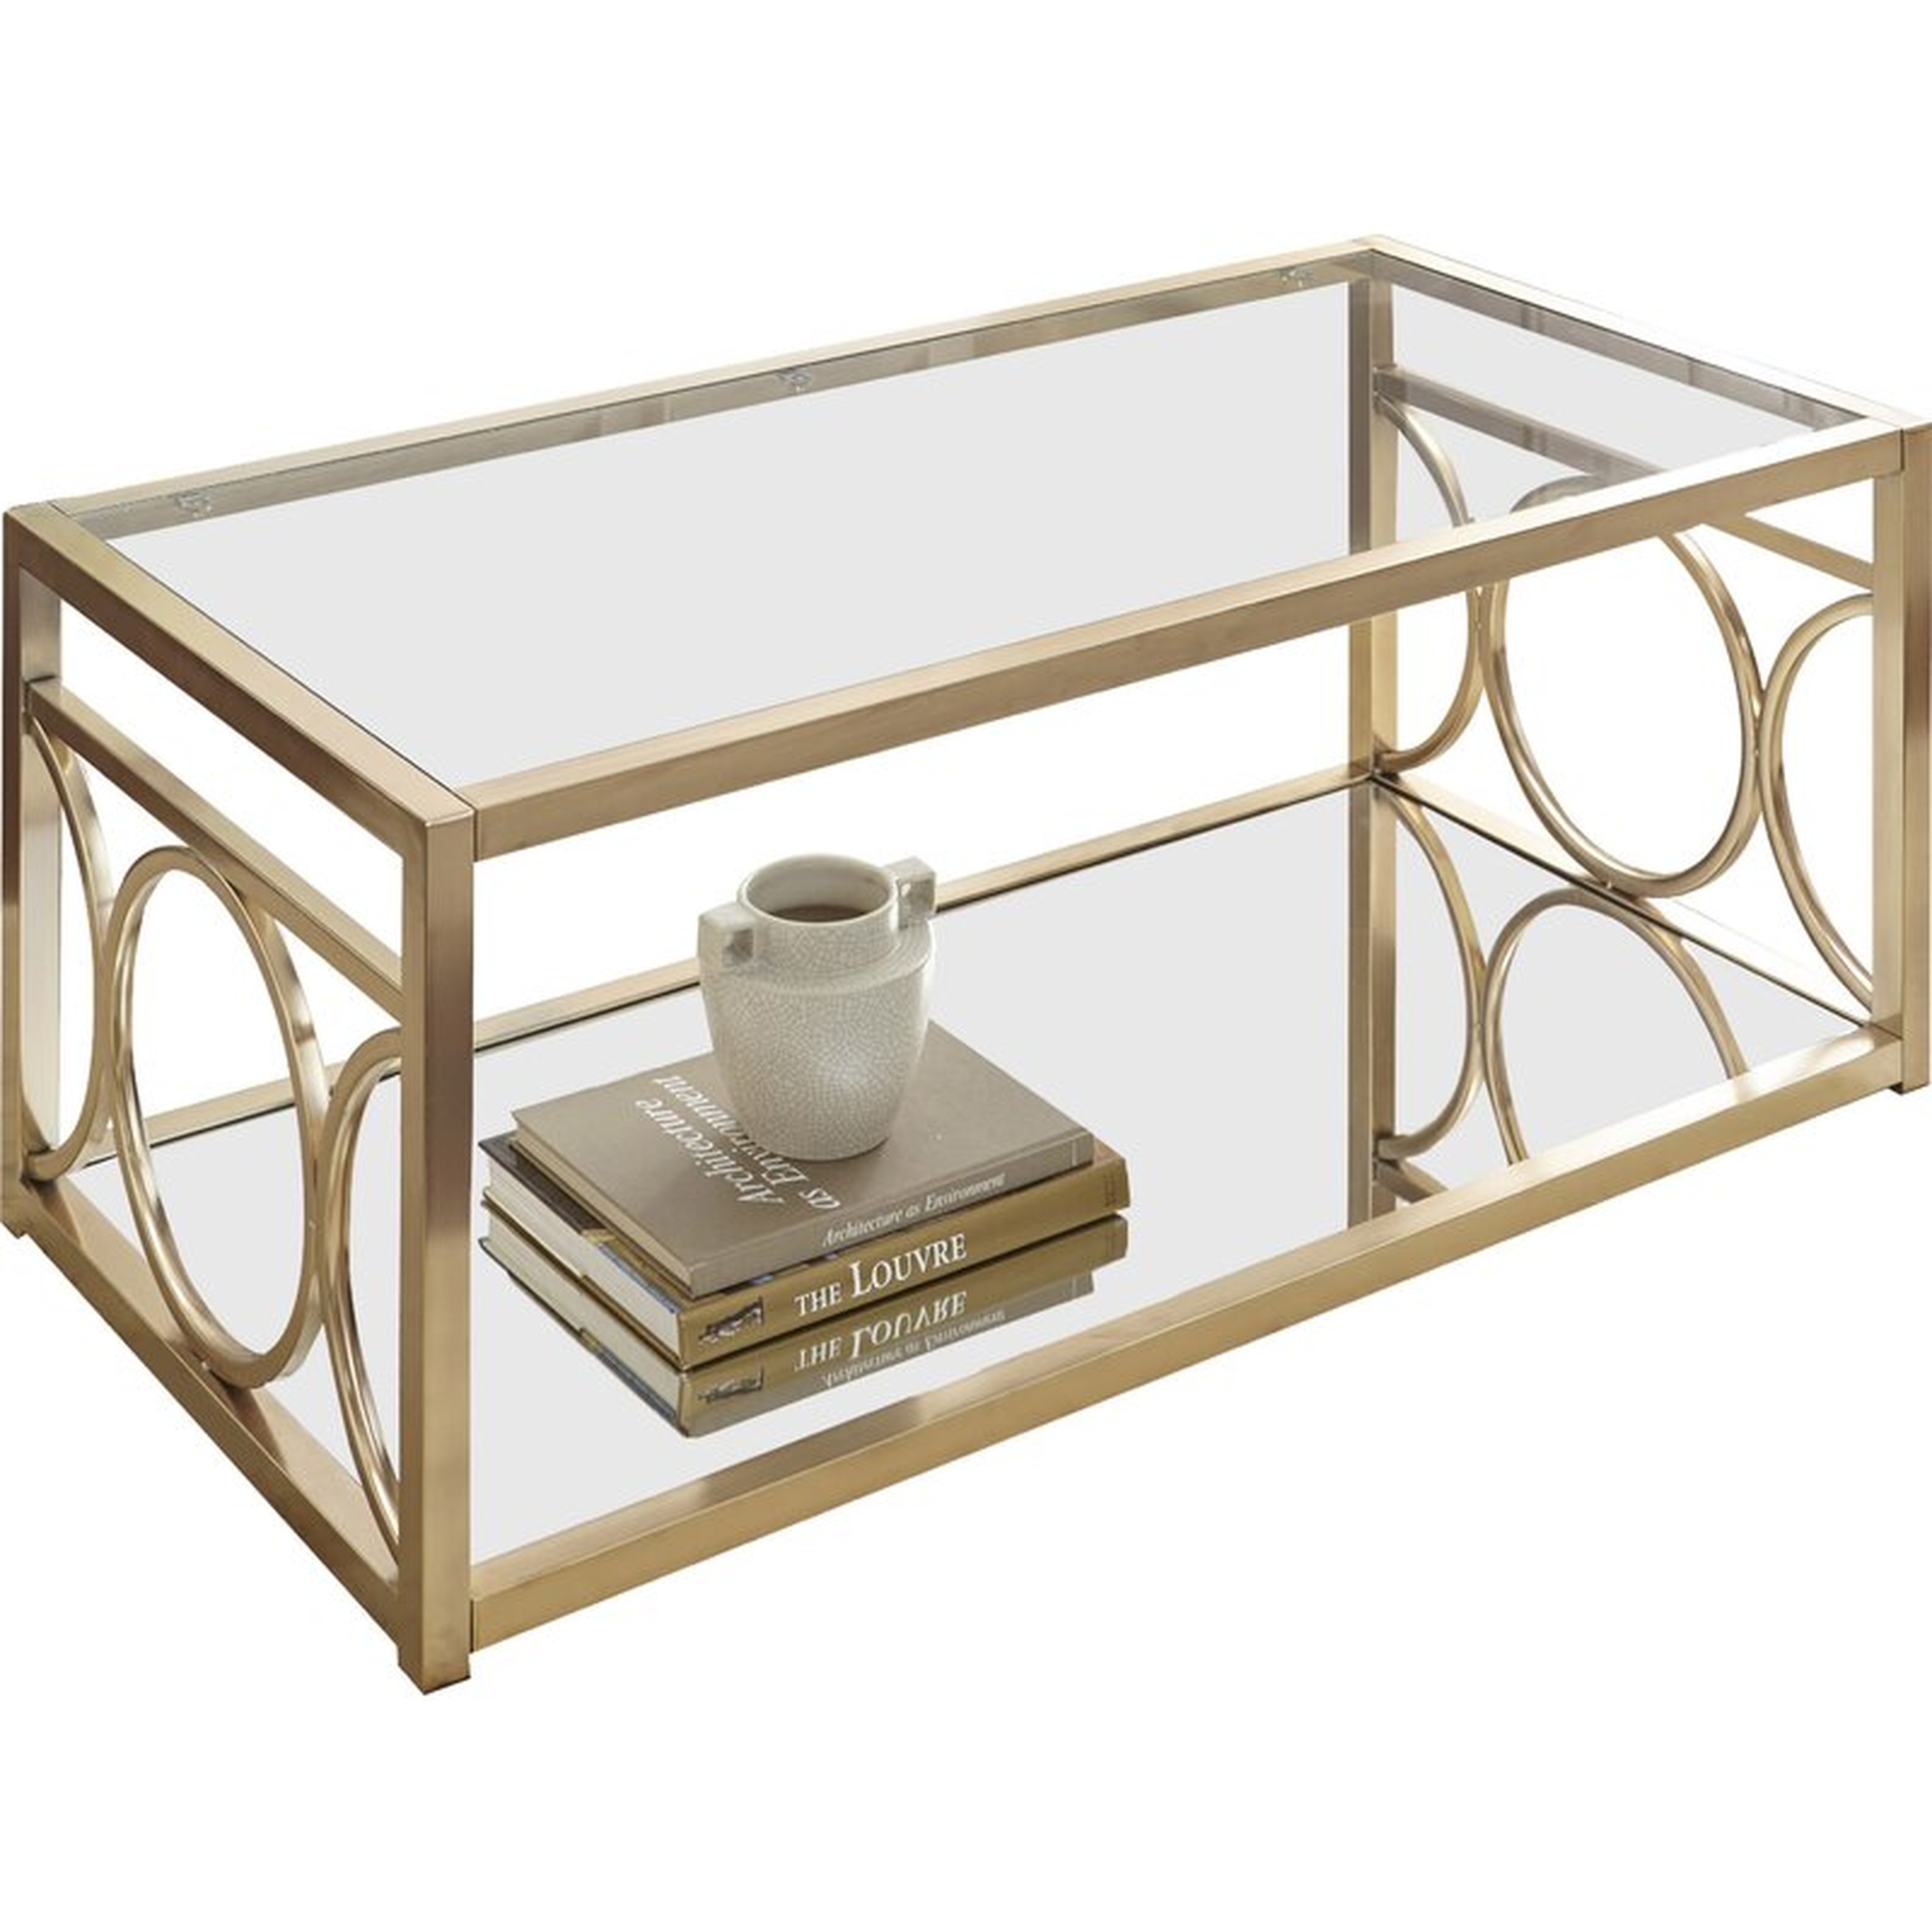 Boulogne Coffee Table with Storage - Wayfair